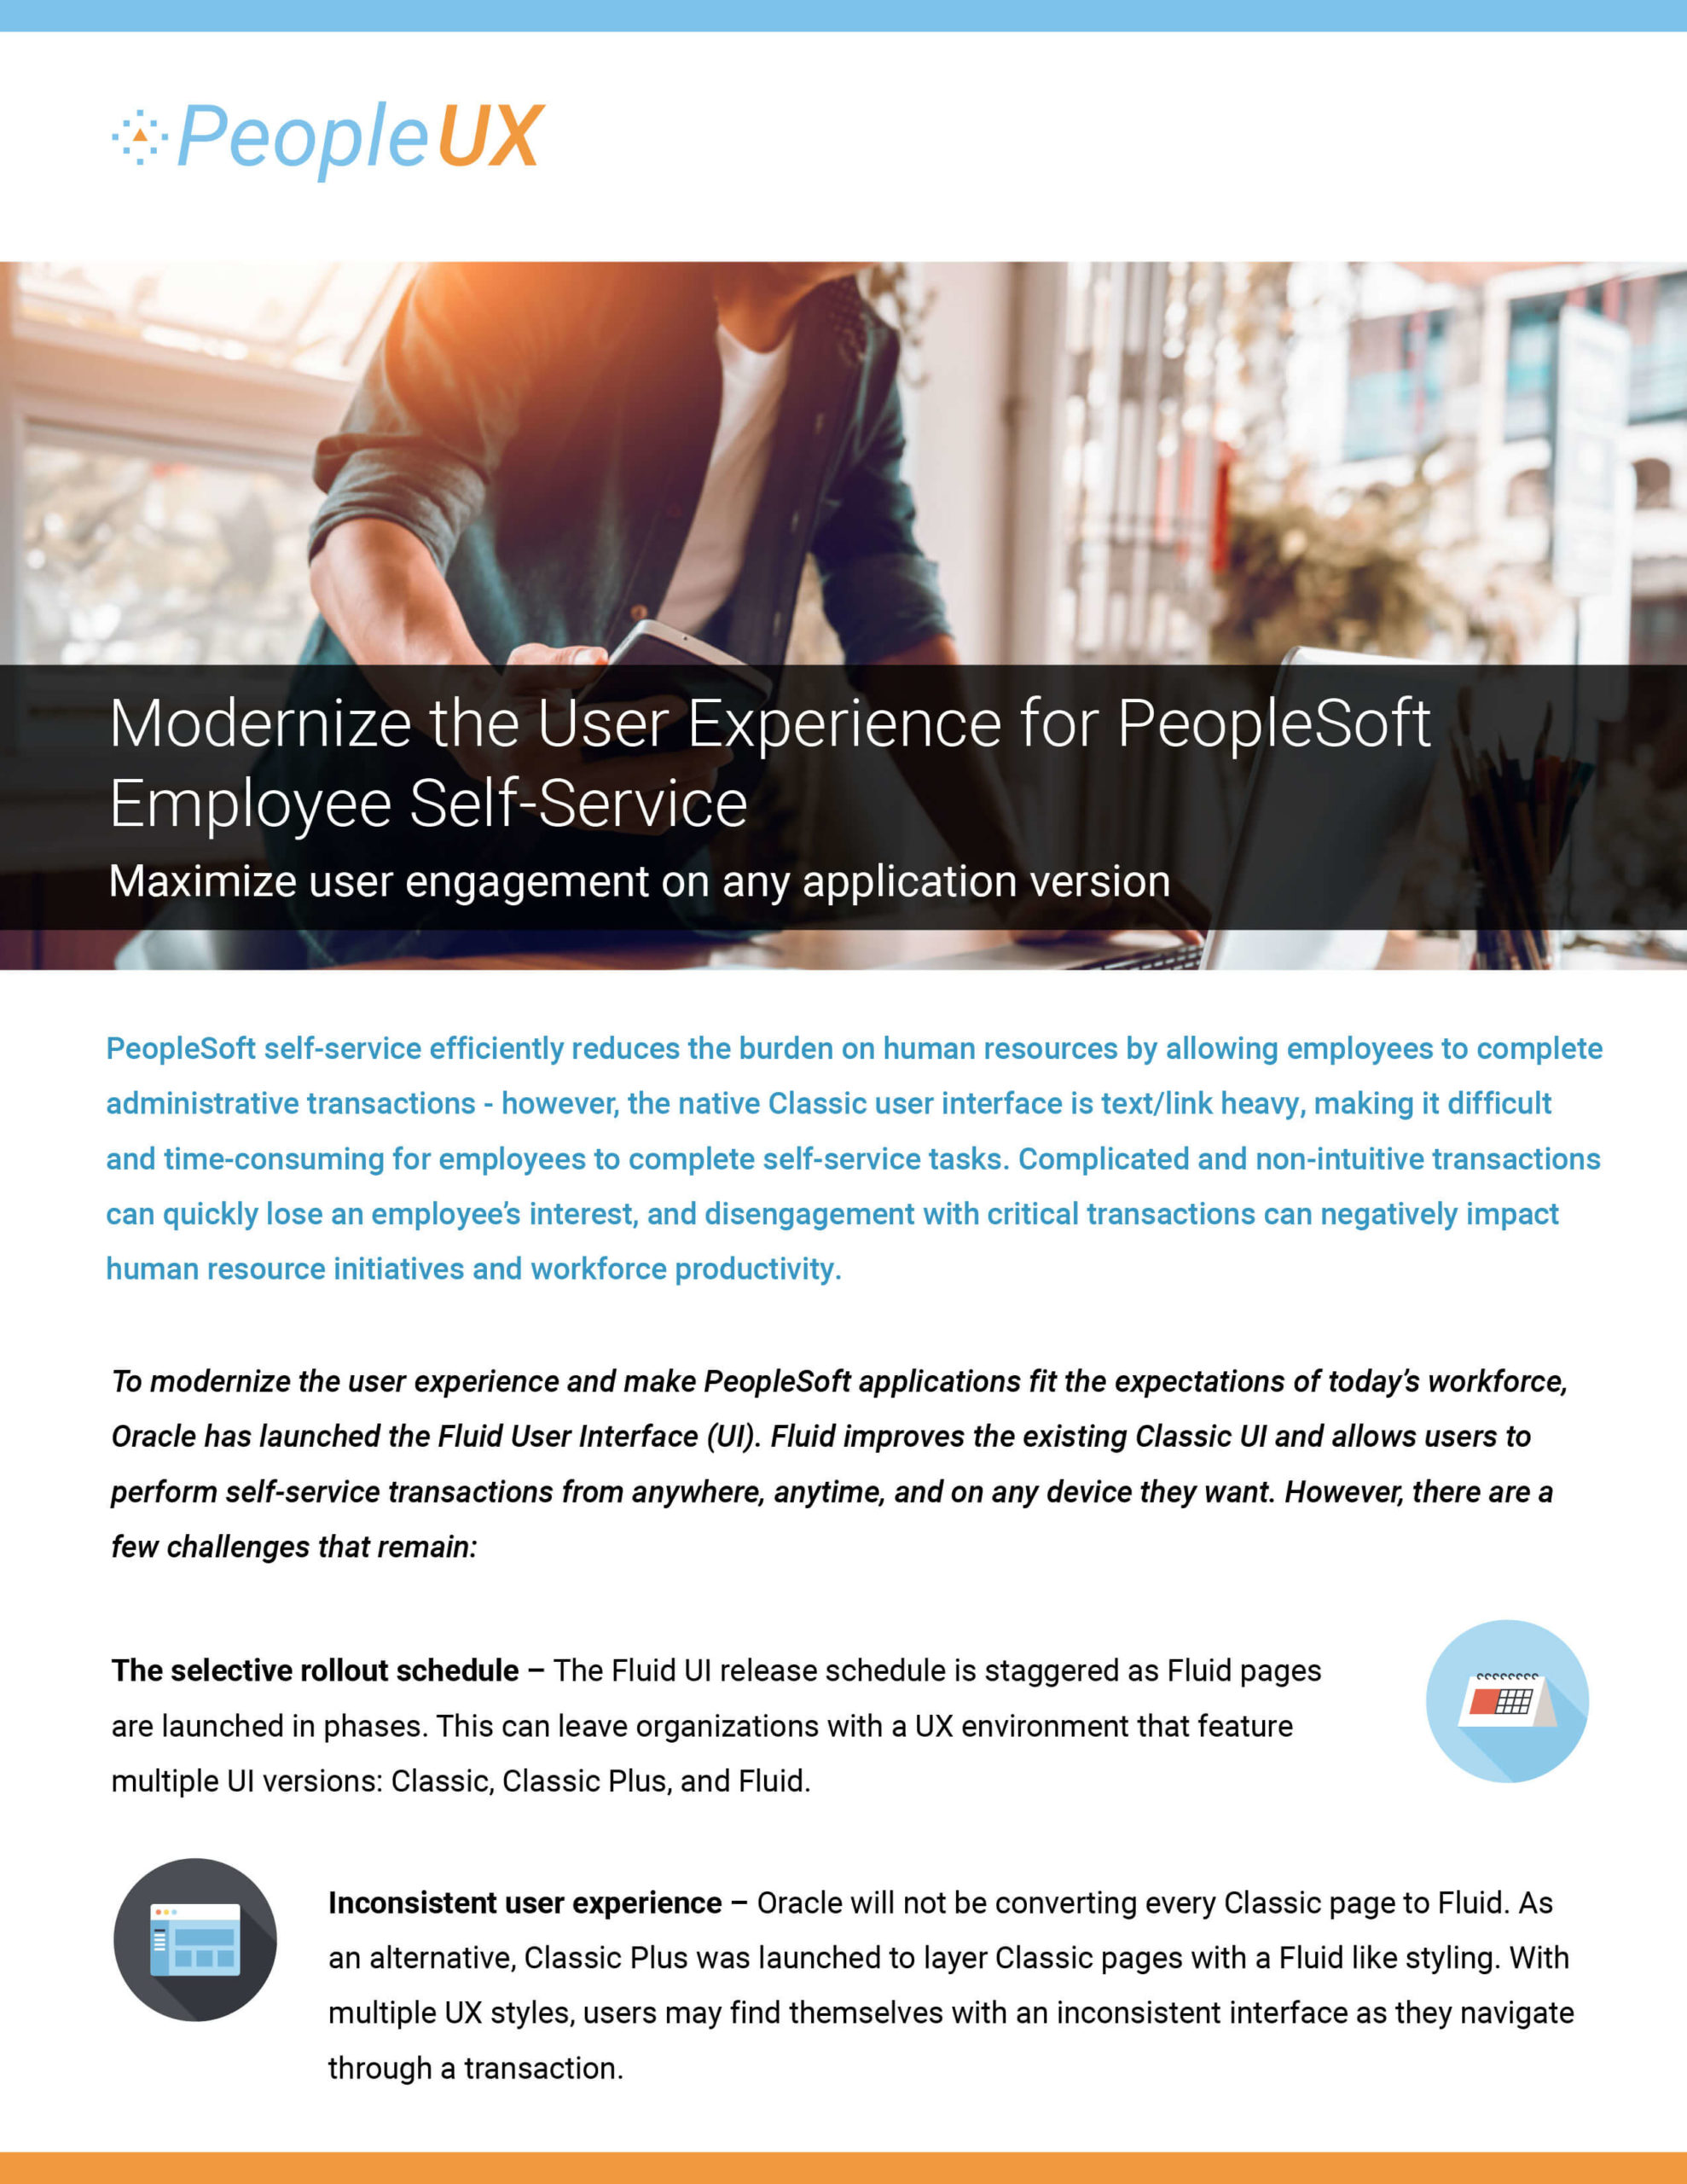 Modernize the User Experience for PeopleSoft Employee Self-Service